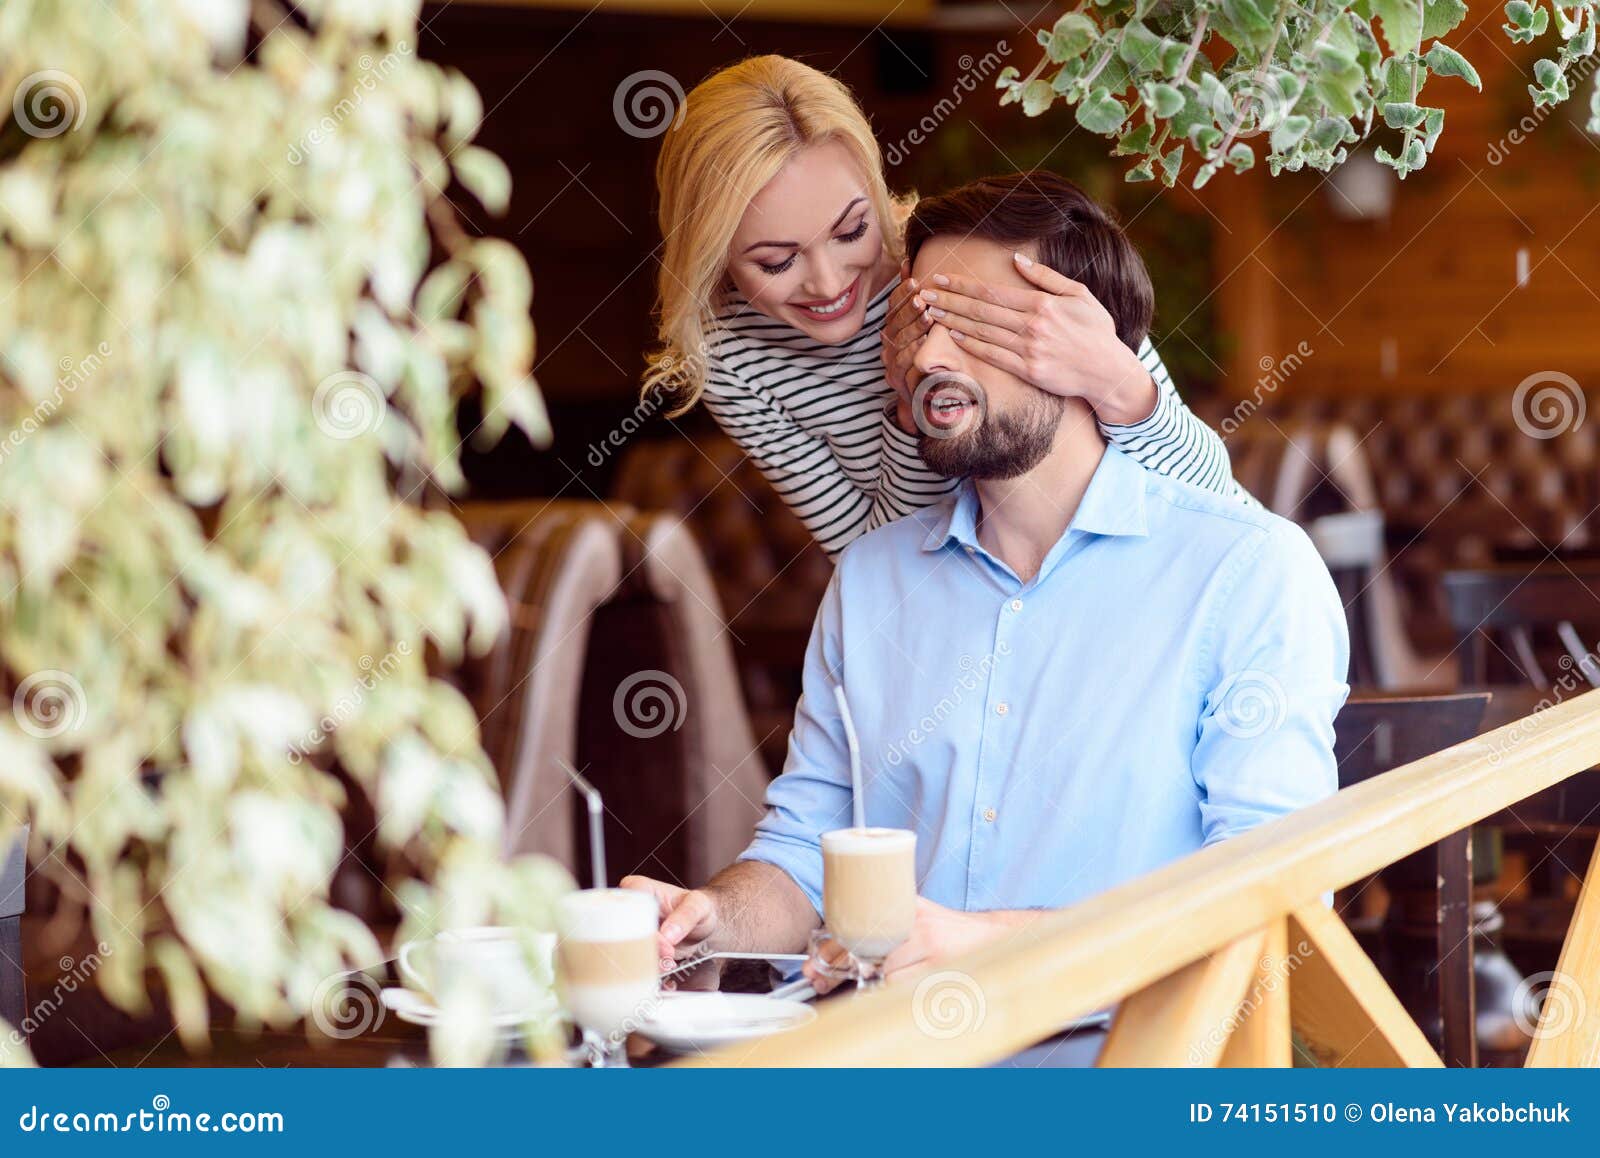 Cheerful Loving Couple Having Fun In Cafeteria Stock Photo Image Of